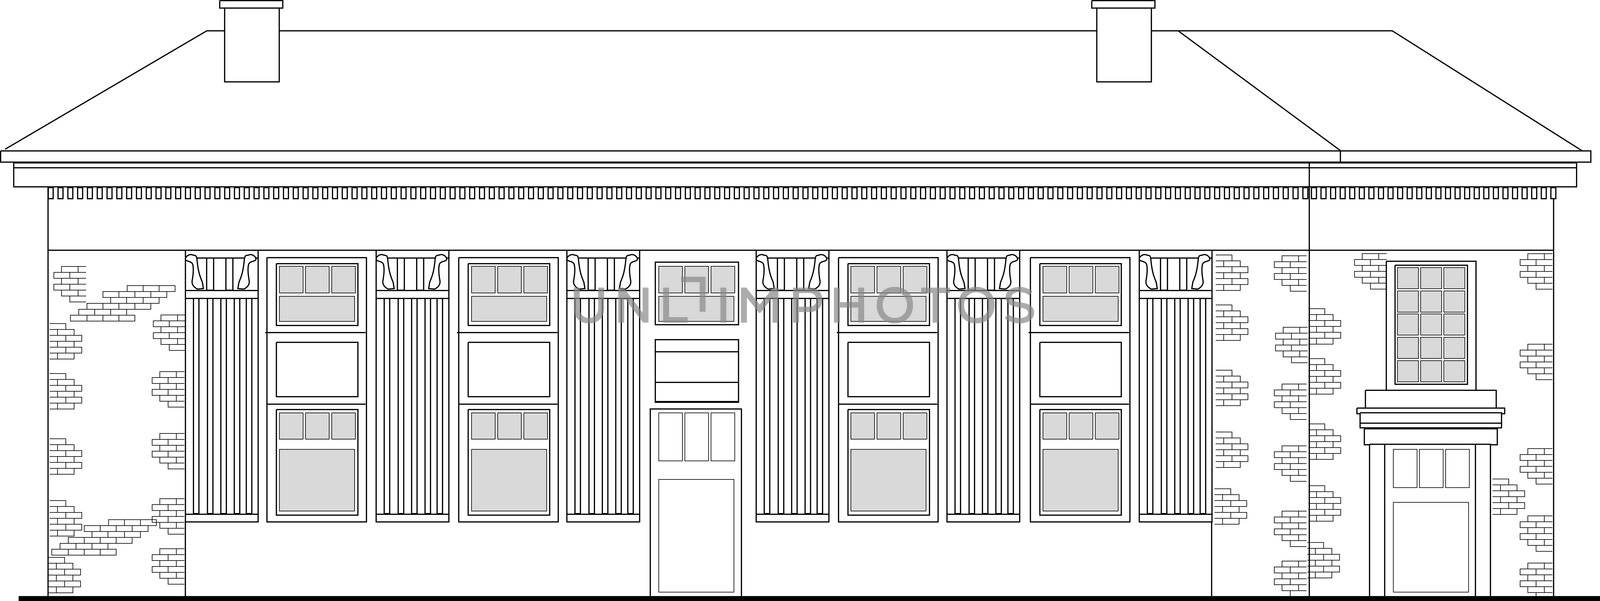 line drawing illustration of a strip mall or shopping center building viewed from front elevation on white background